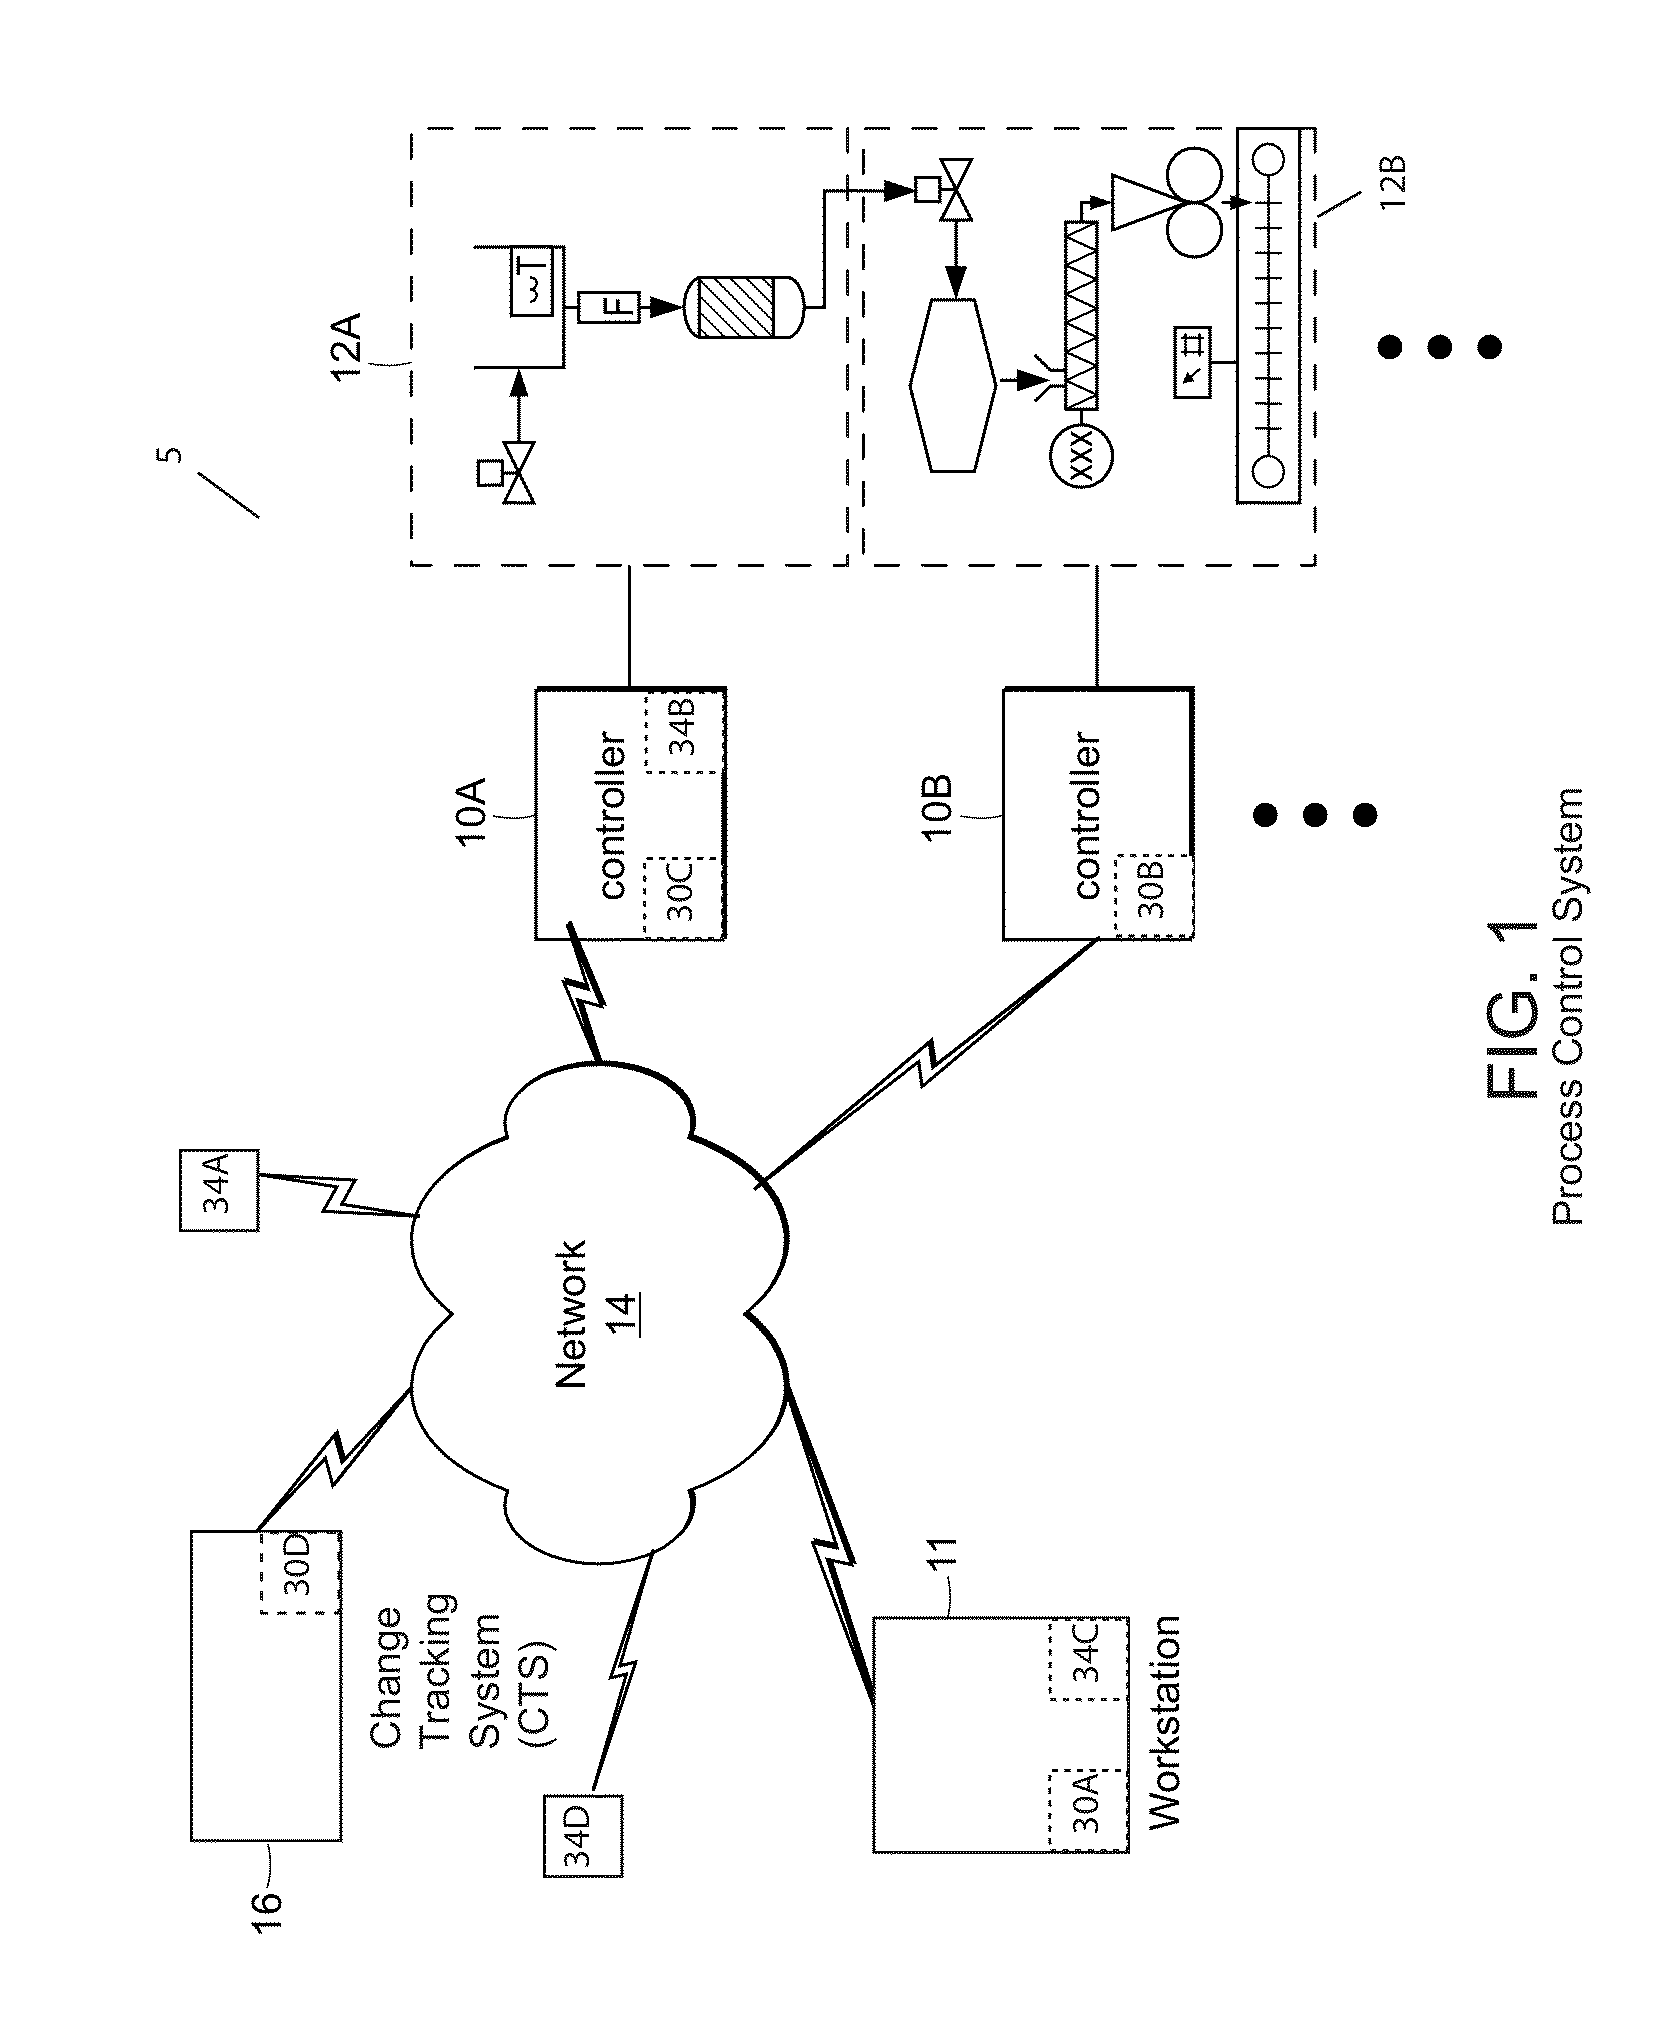 Methods and apparatus for control configuration with enhanced change-tracking